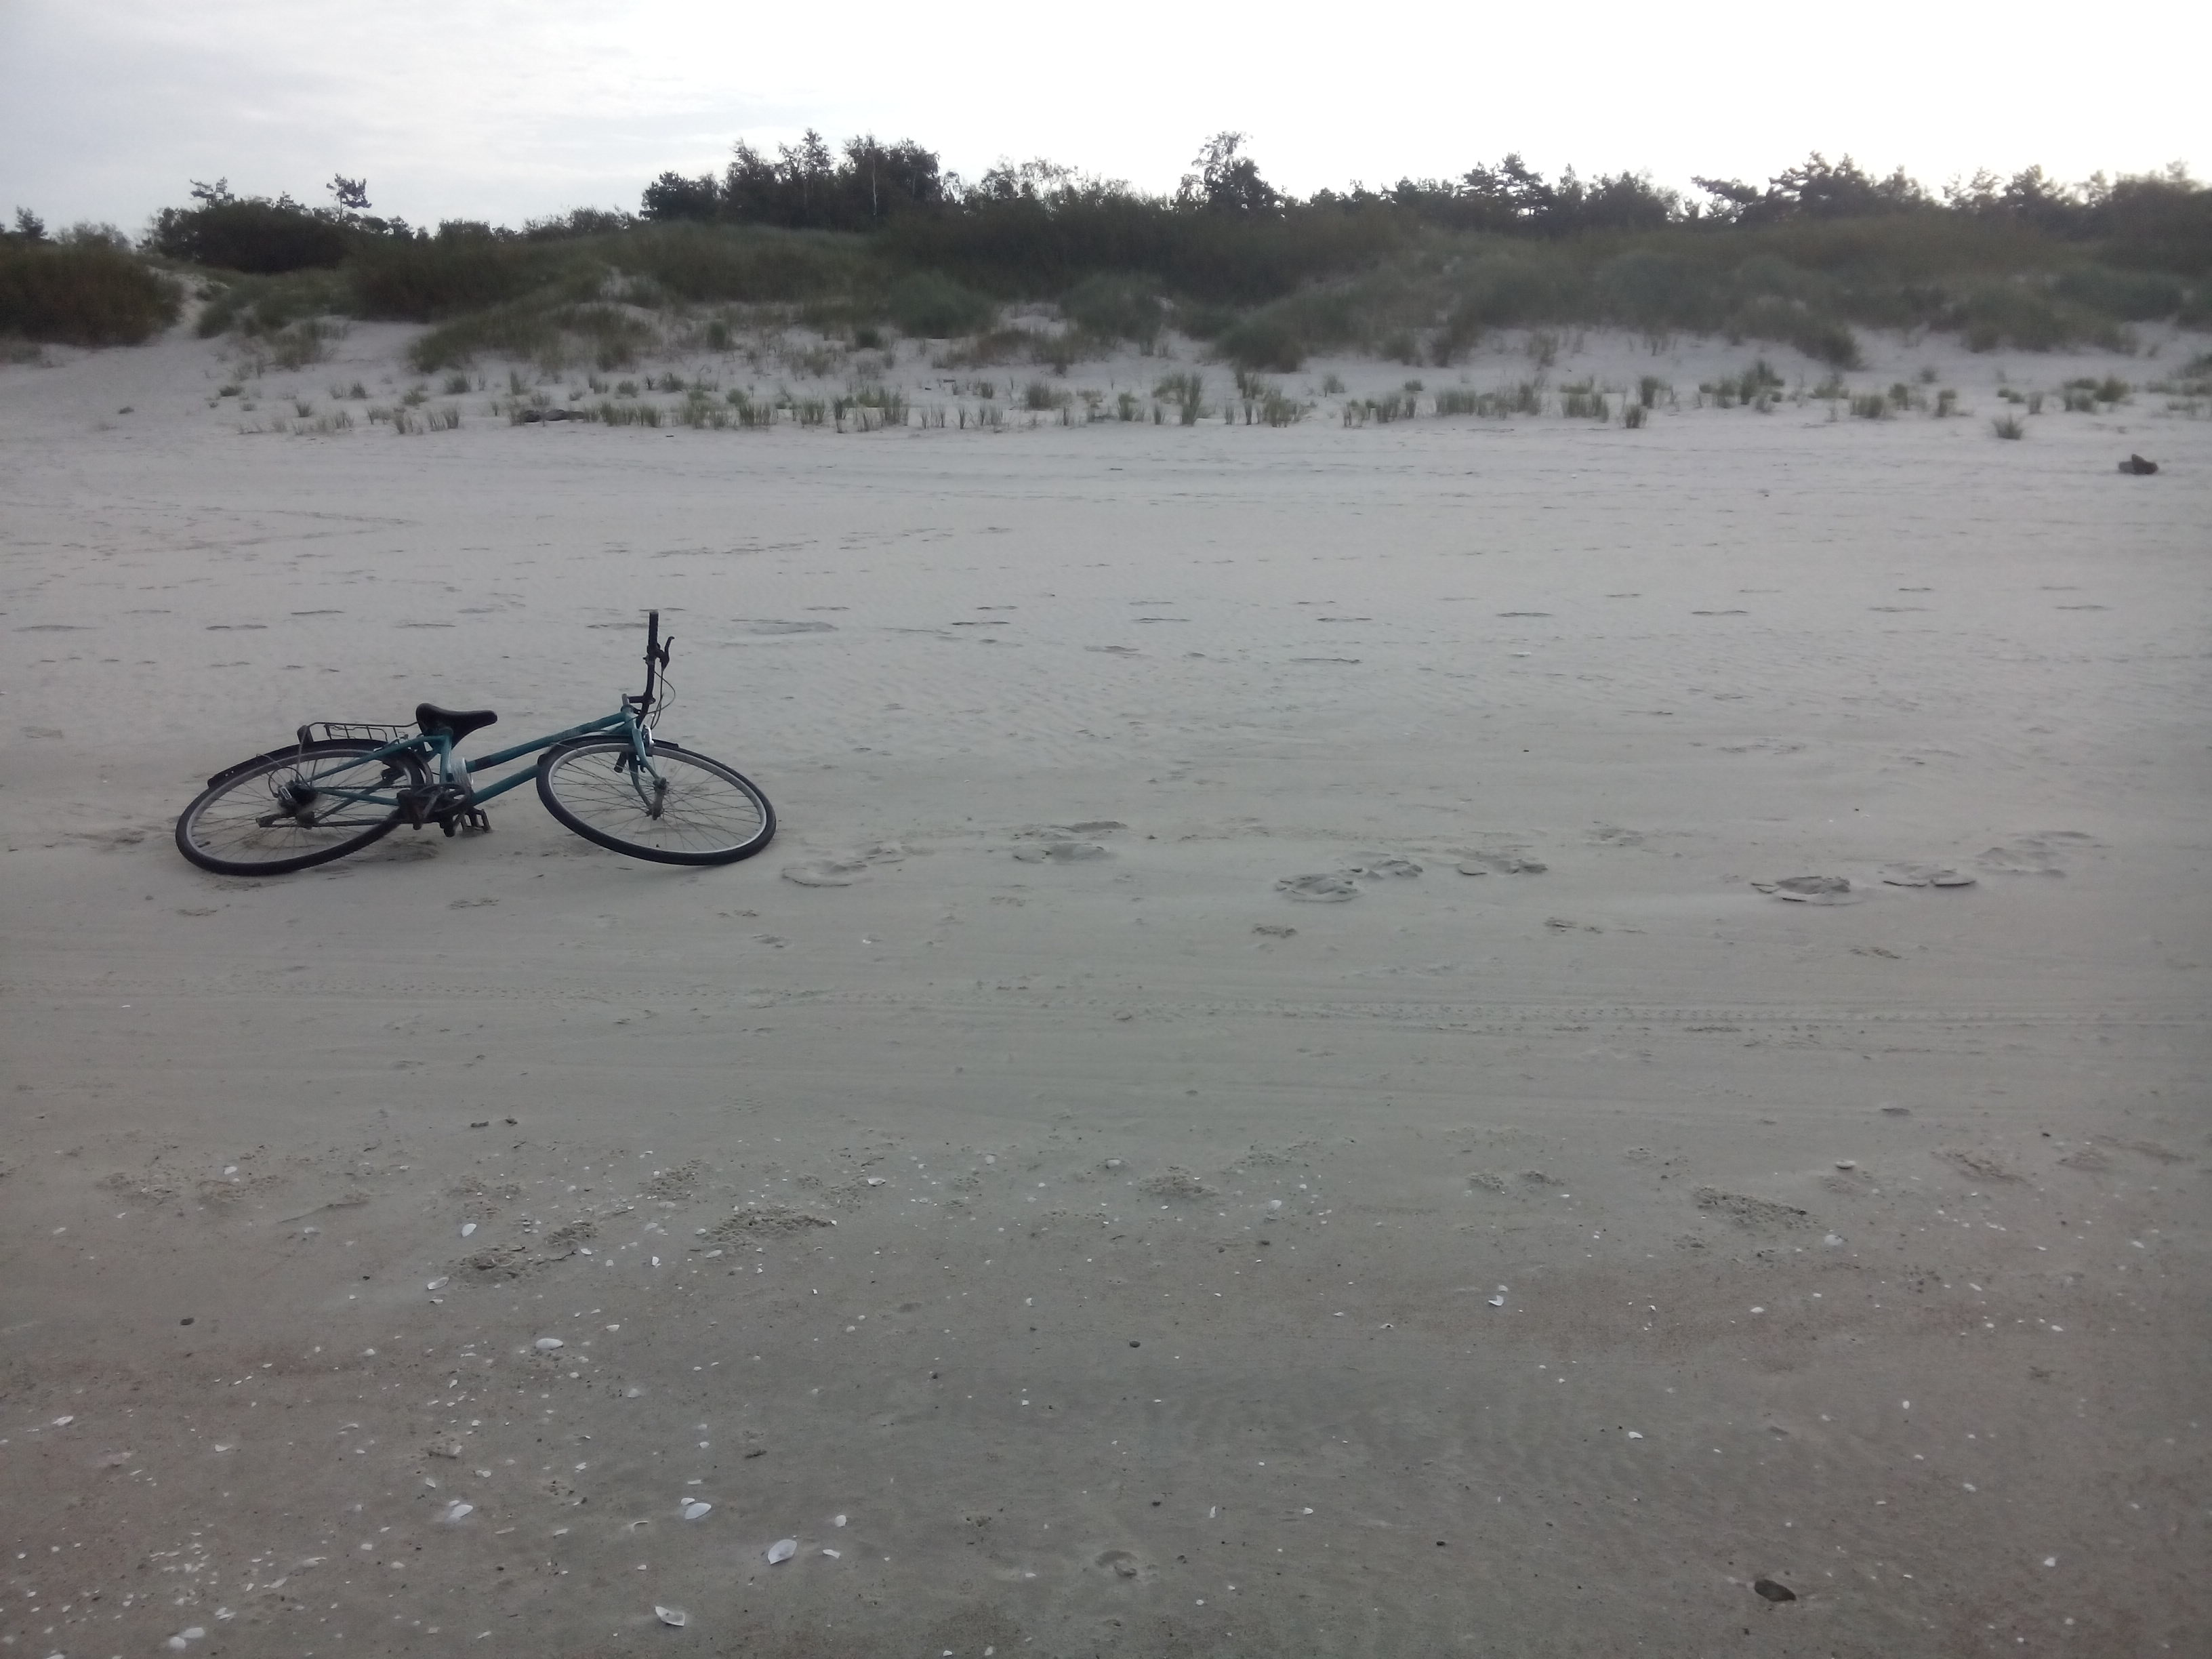 A wet sandy beach stretches out ahead; a green bicycle lies on its side in the middle left of the frame